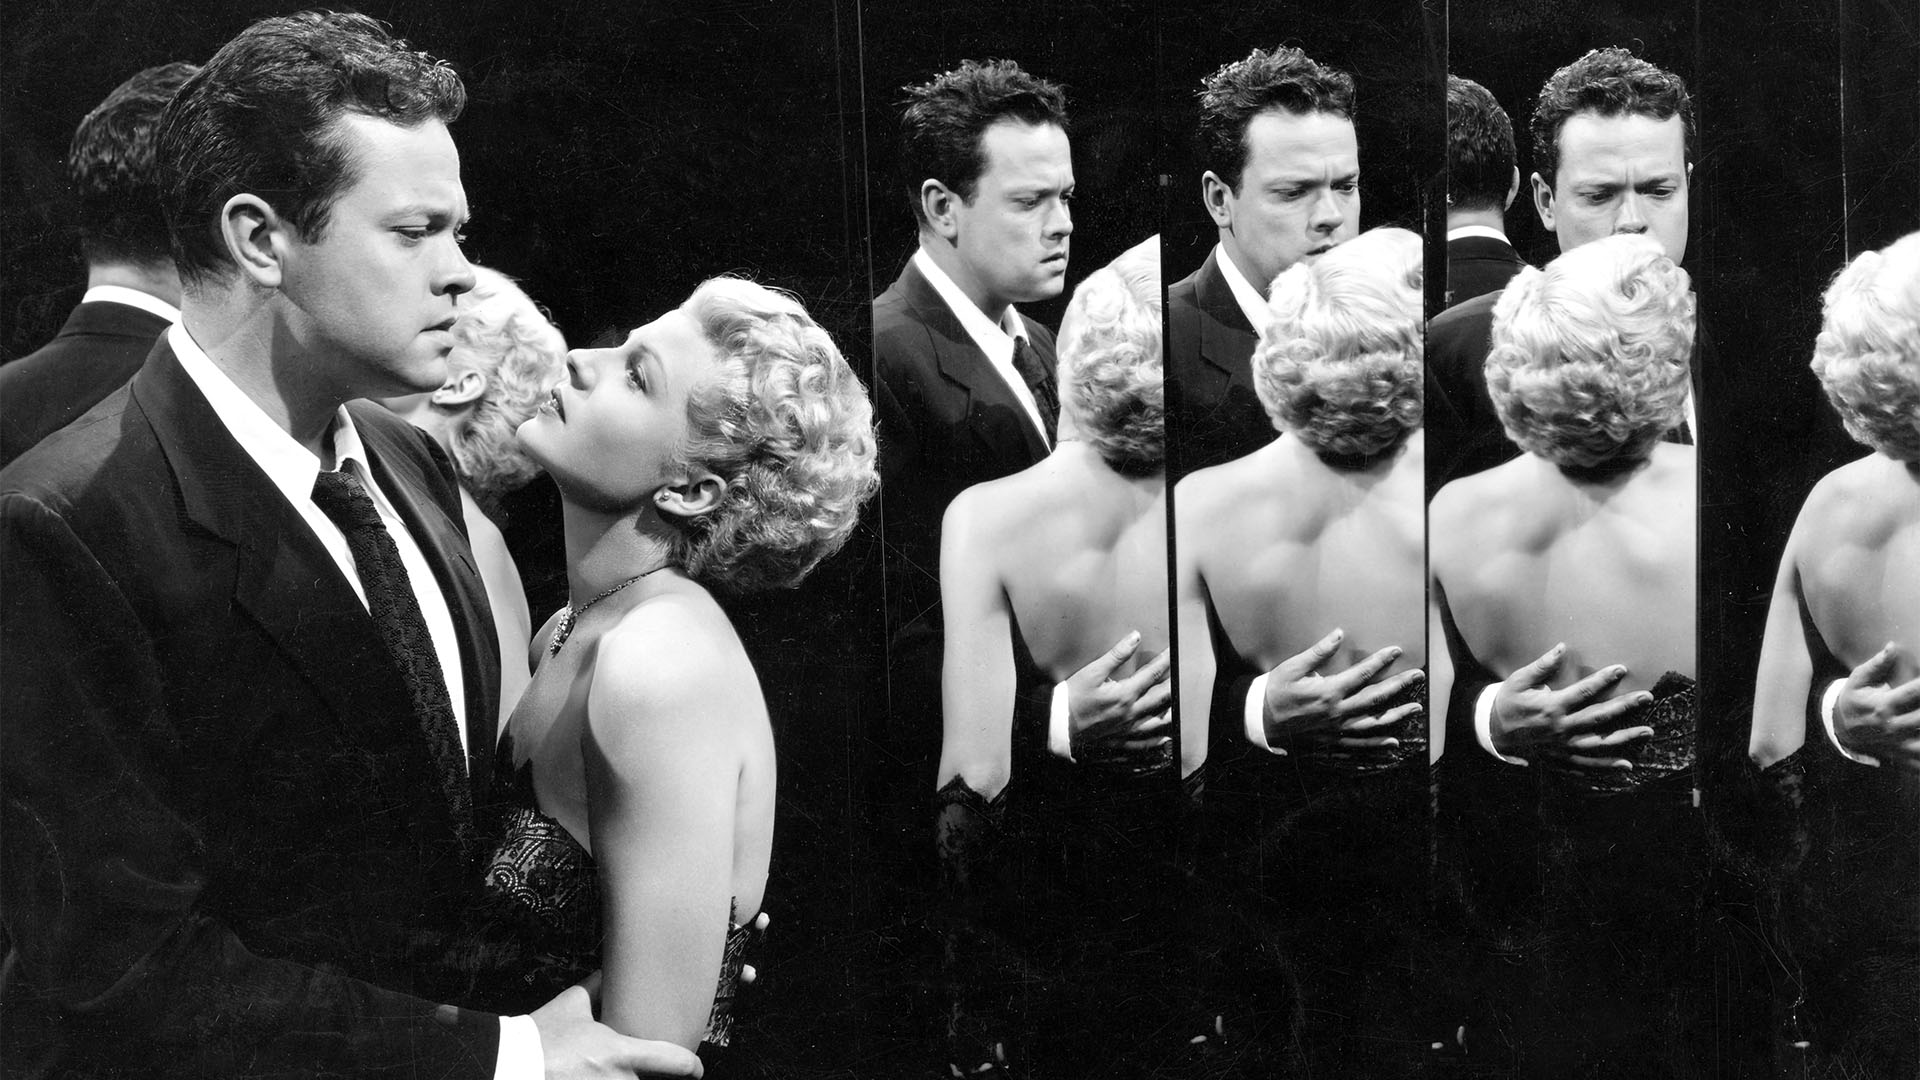 Orson Welles starred with Rita Hayworth "the lady from shanghai".  The then-actress was already his wife (George Rinhart/Corbis via Getty Images)